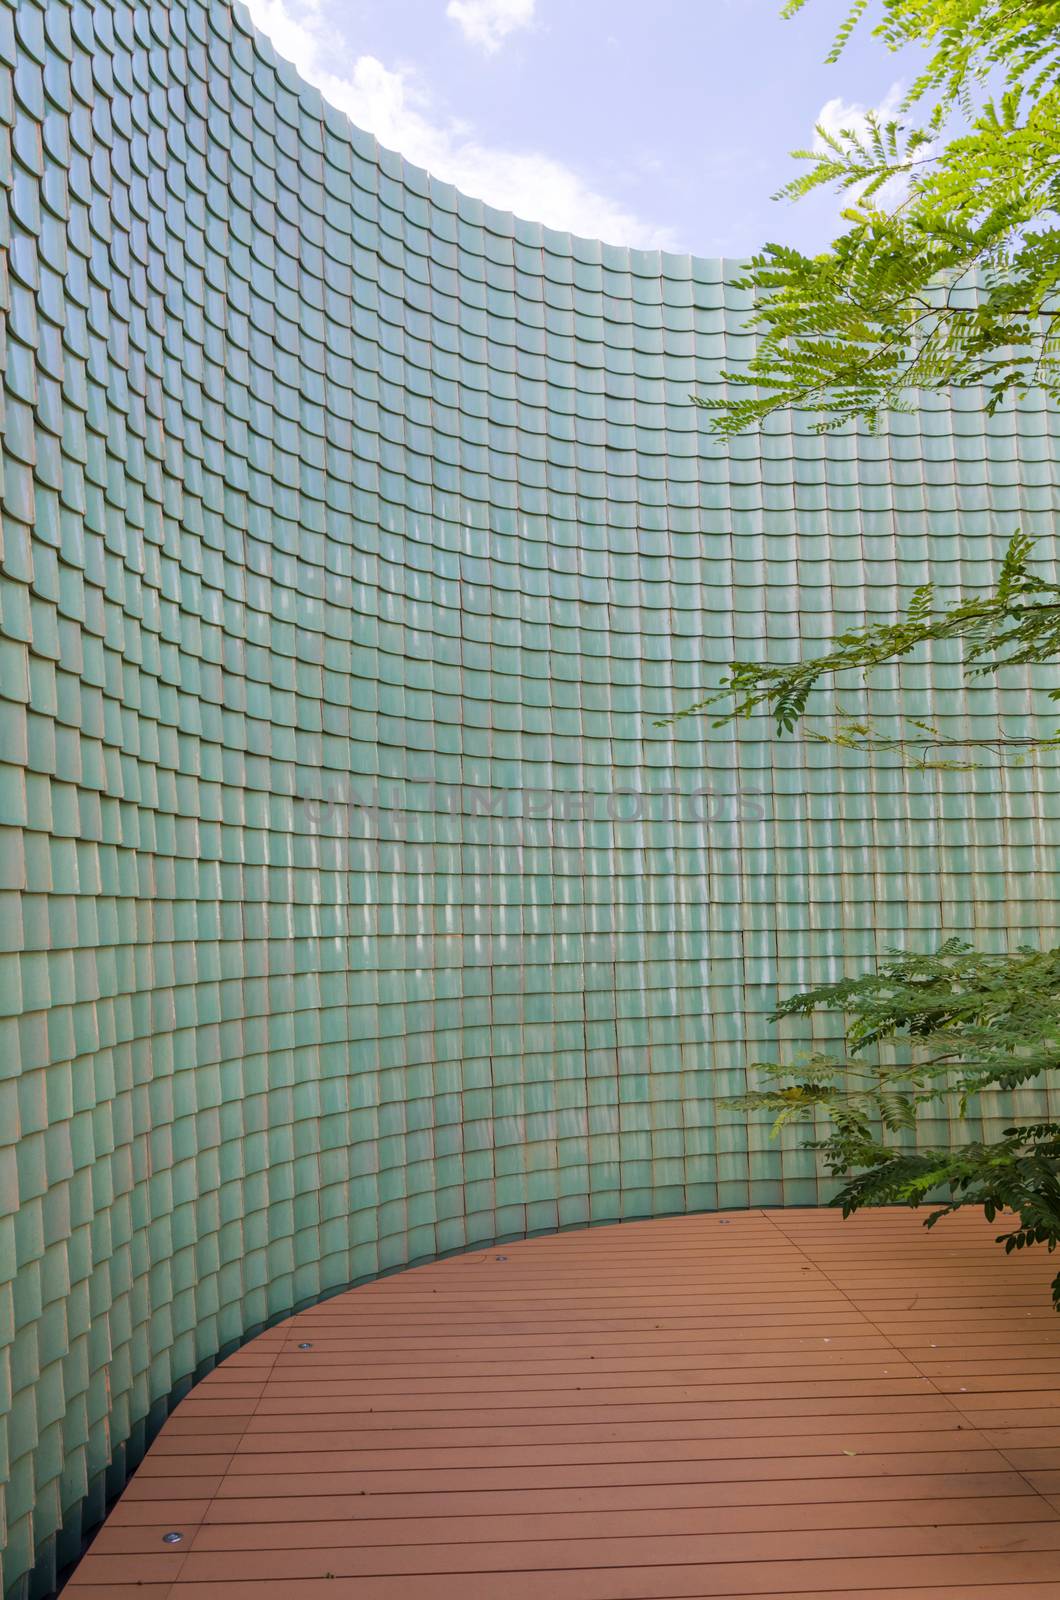 Chinese green glazed tile wall in the garden by siraanamwong